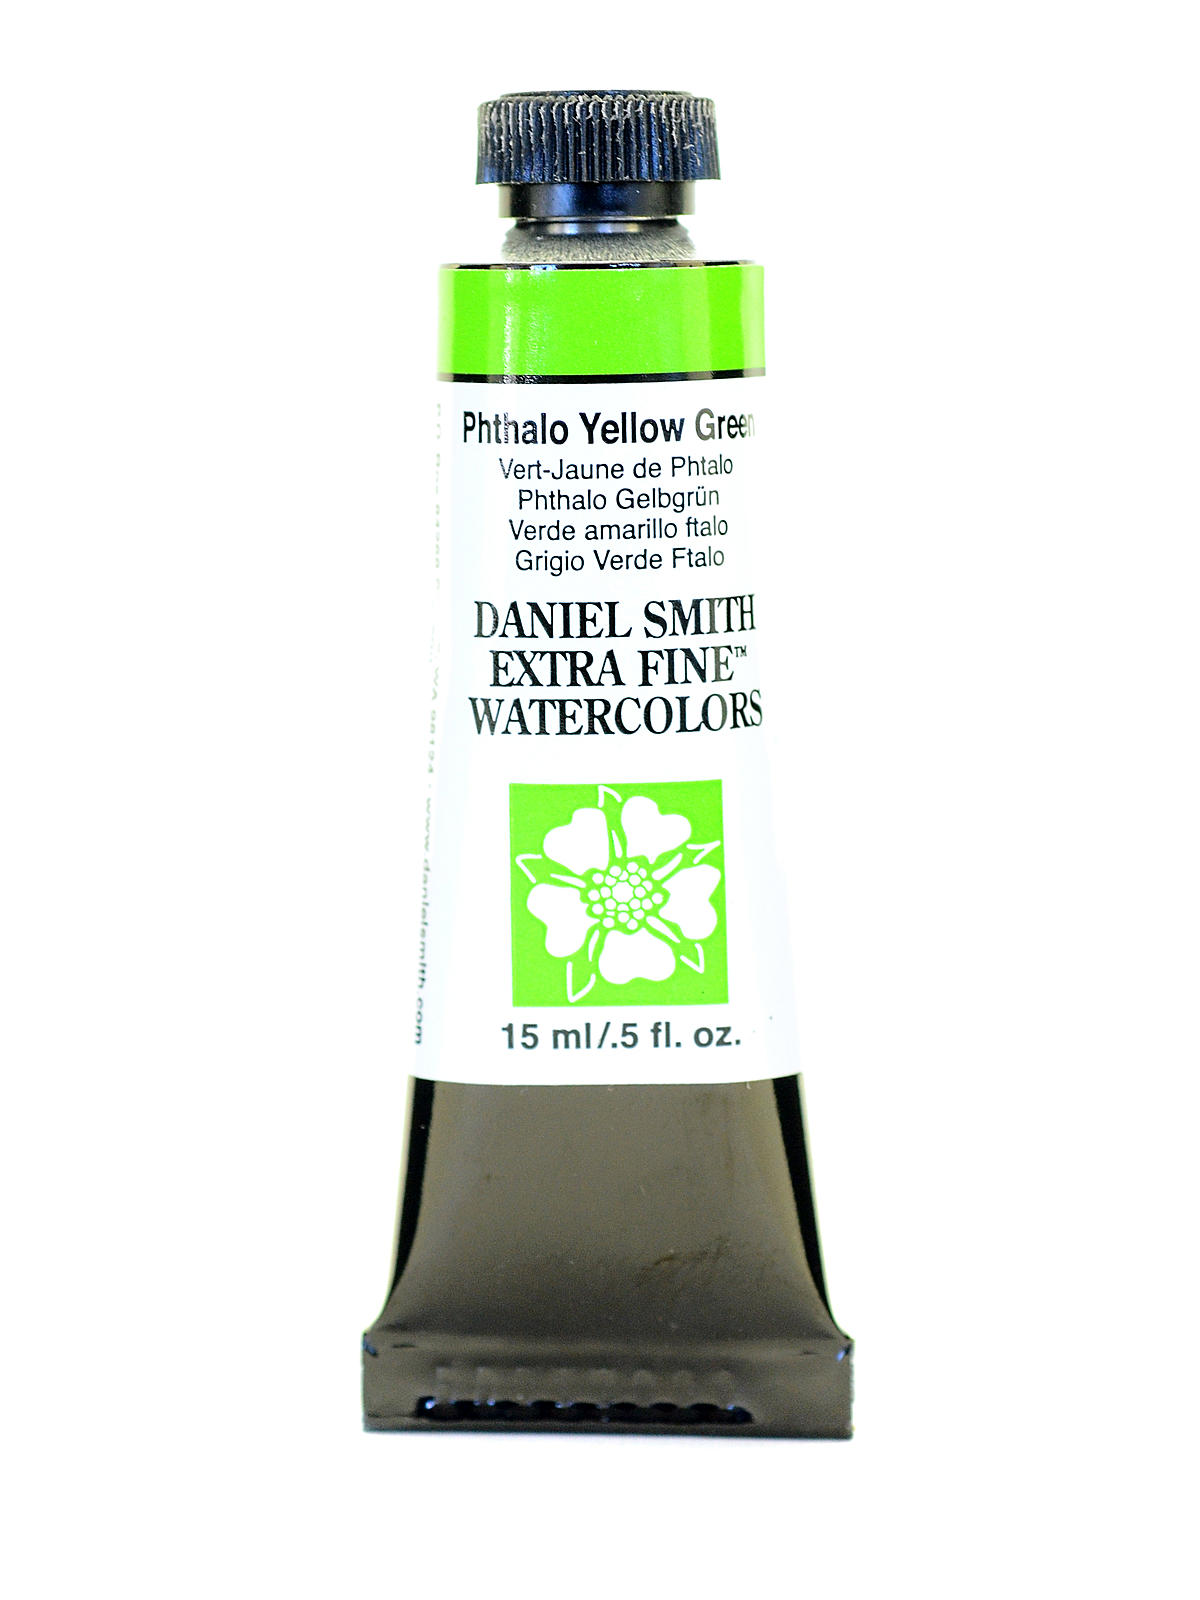 Extra Fine Watercolors Phthalo Yellow Green 15 Ml